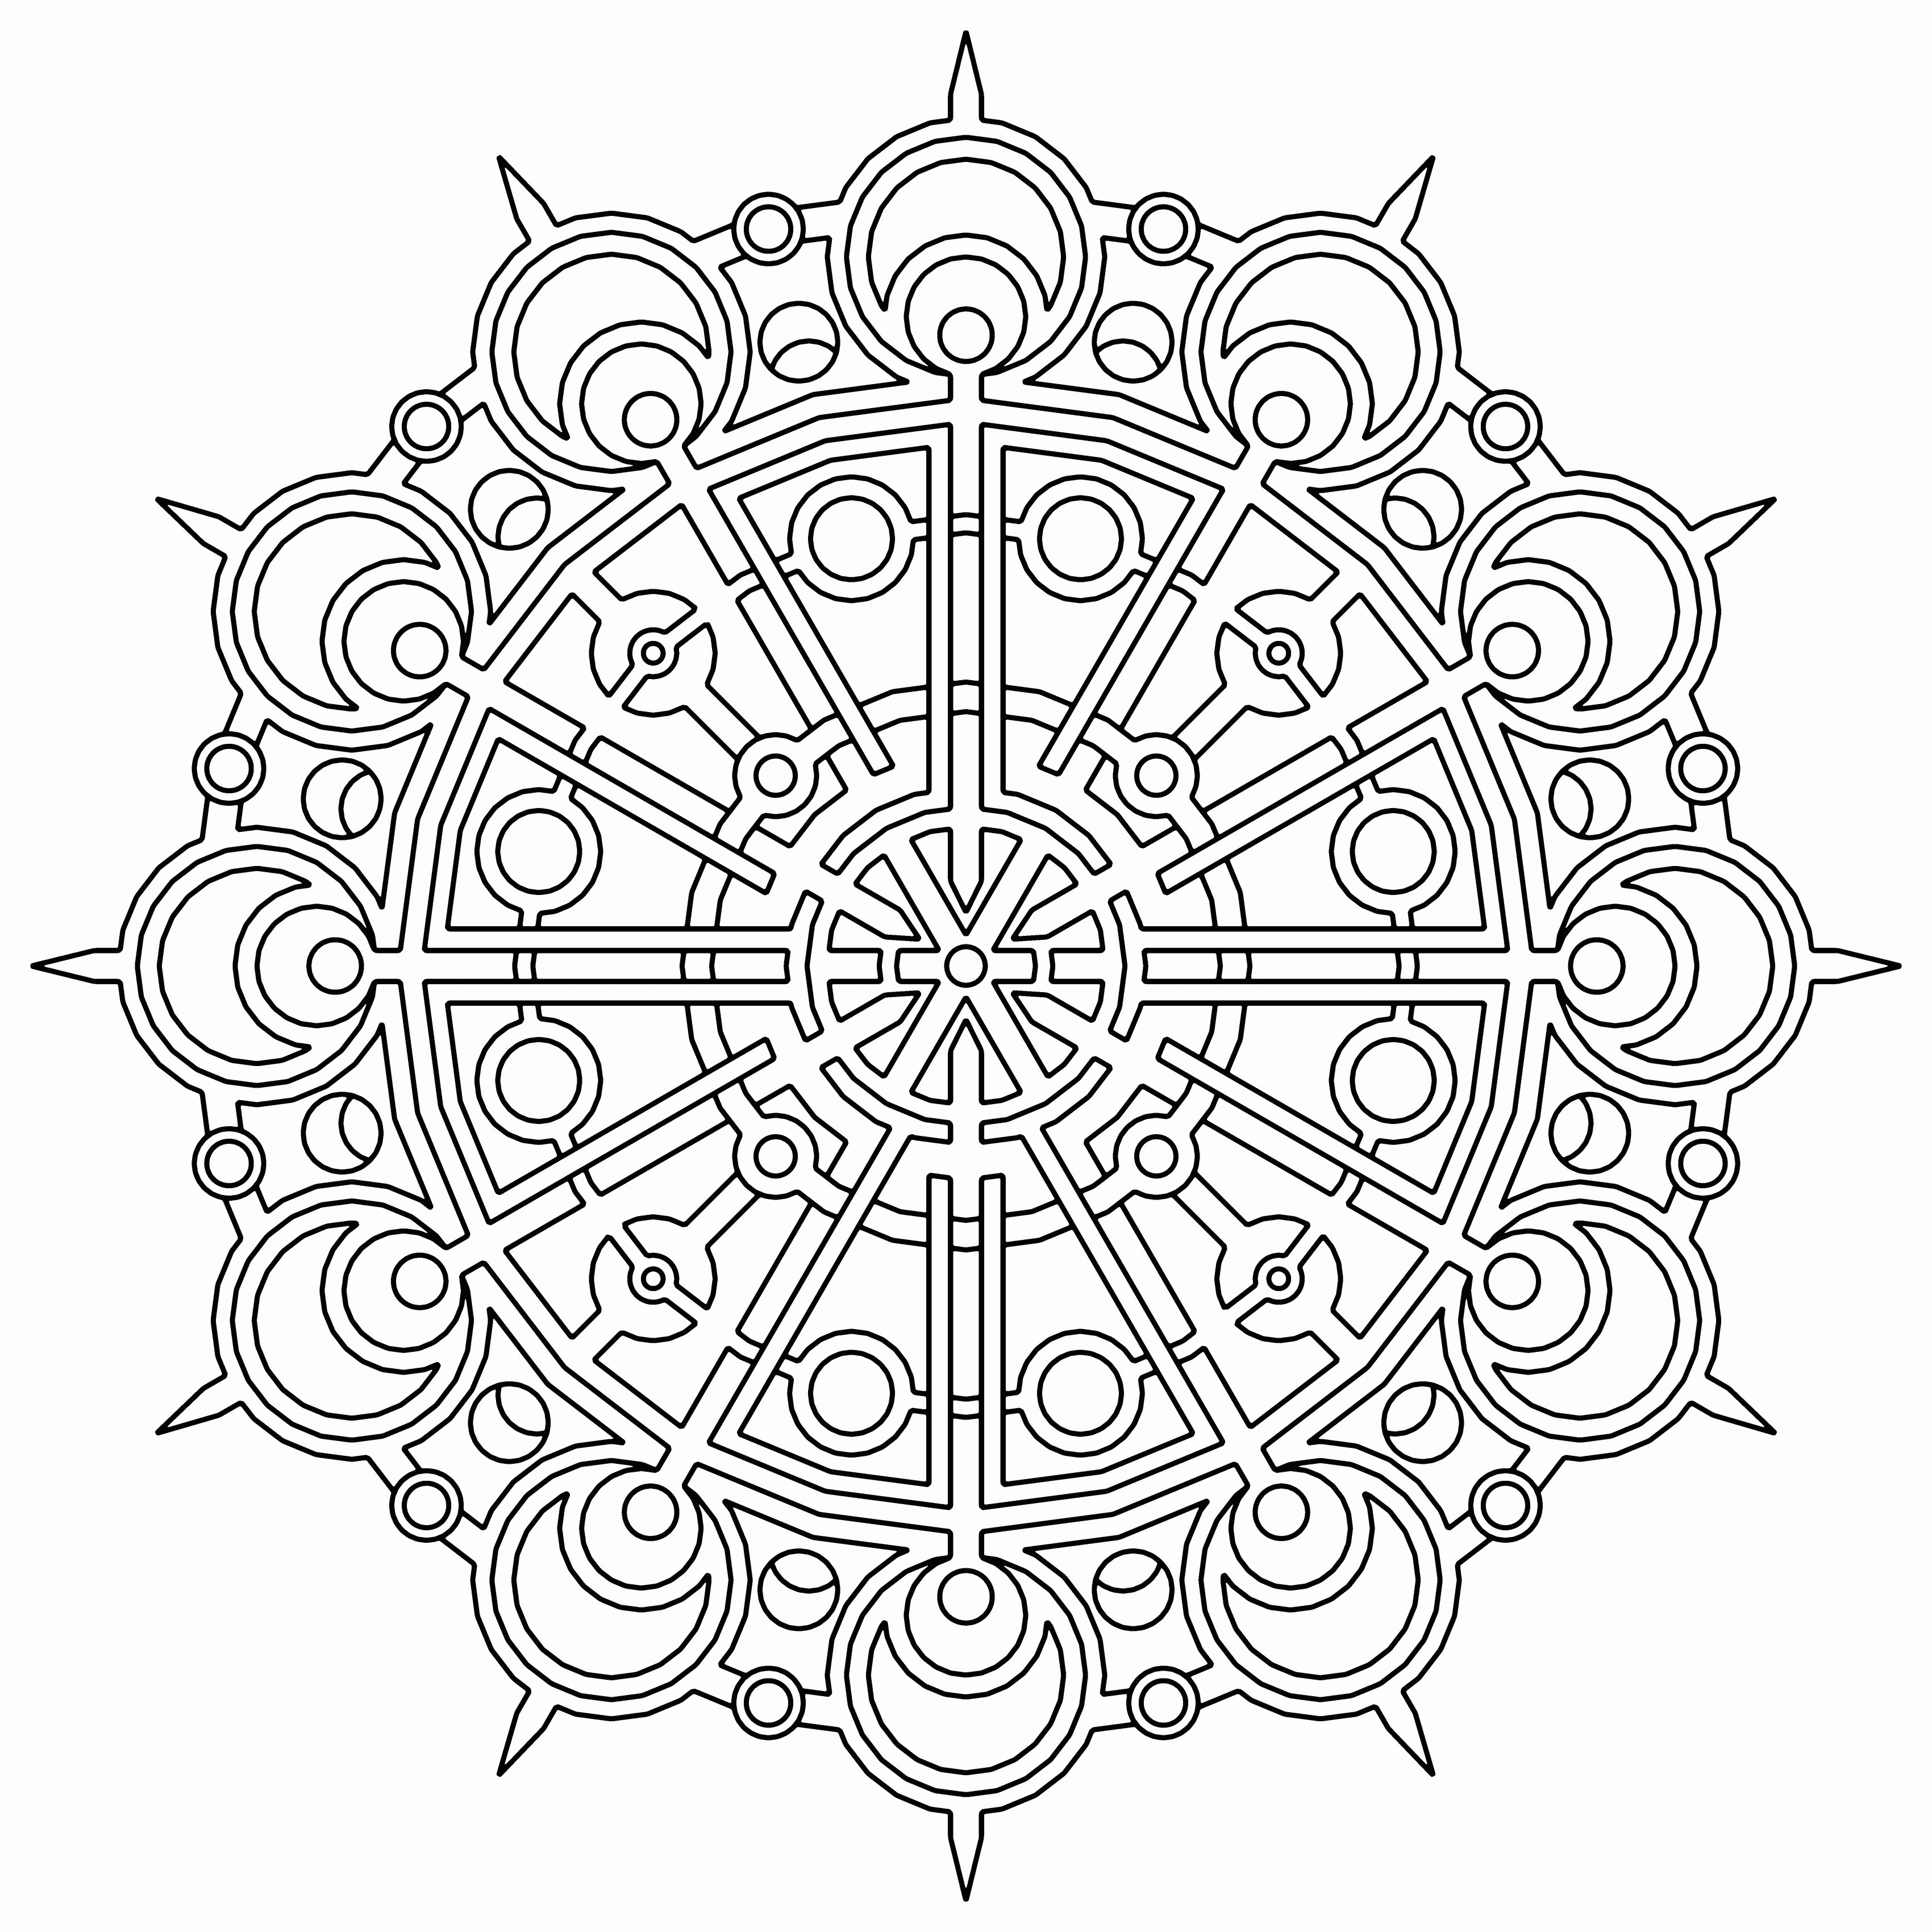 Printable Geometric Coloring Pages
 Free Printable Geometric Coloring Pages For Adults